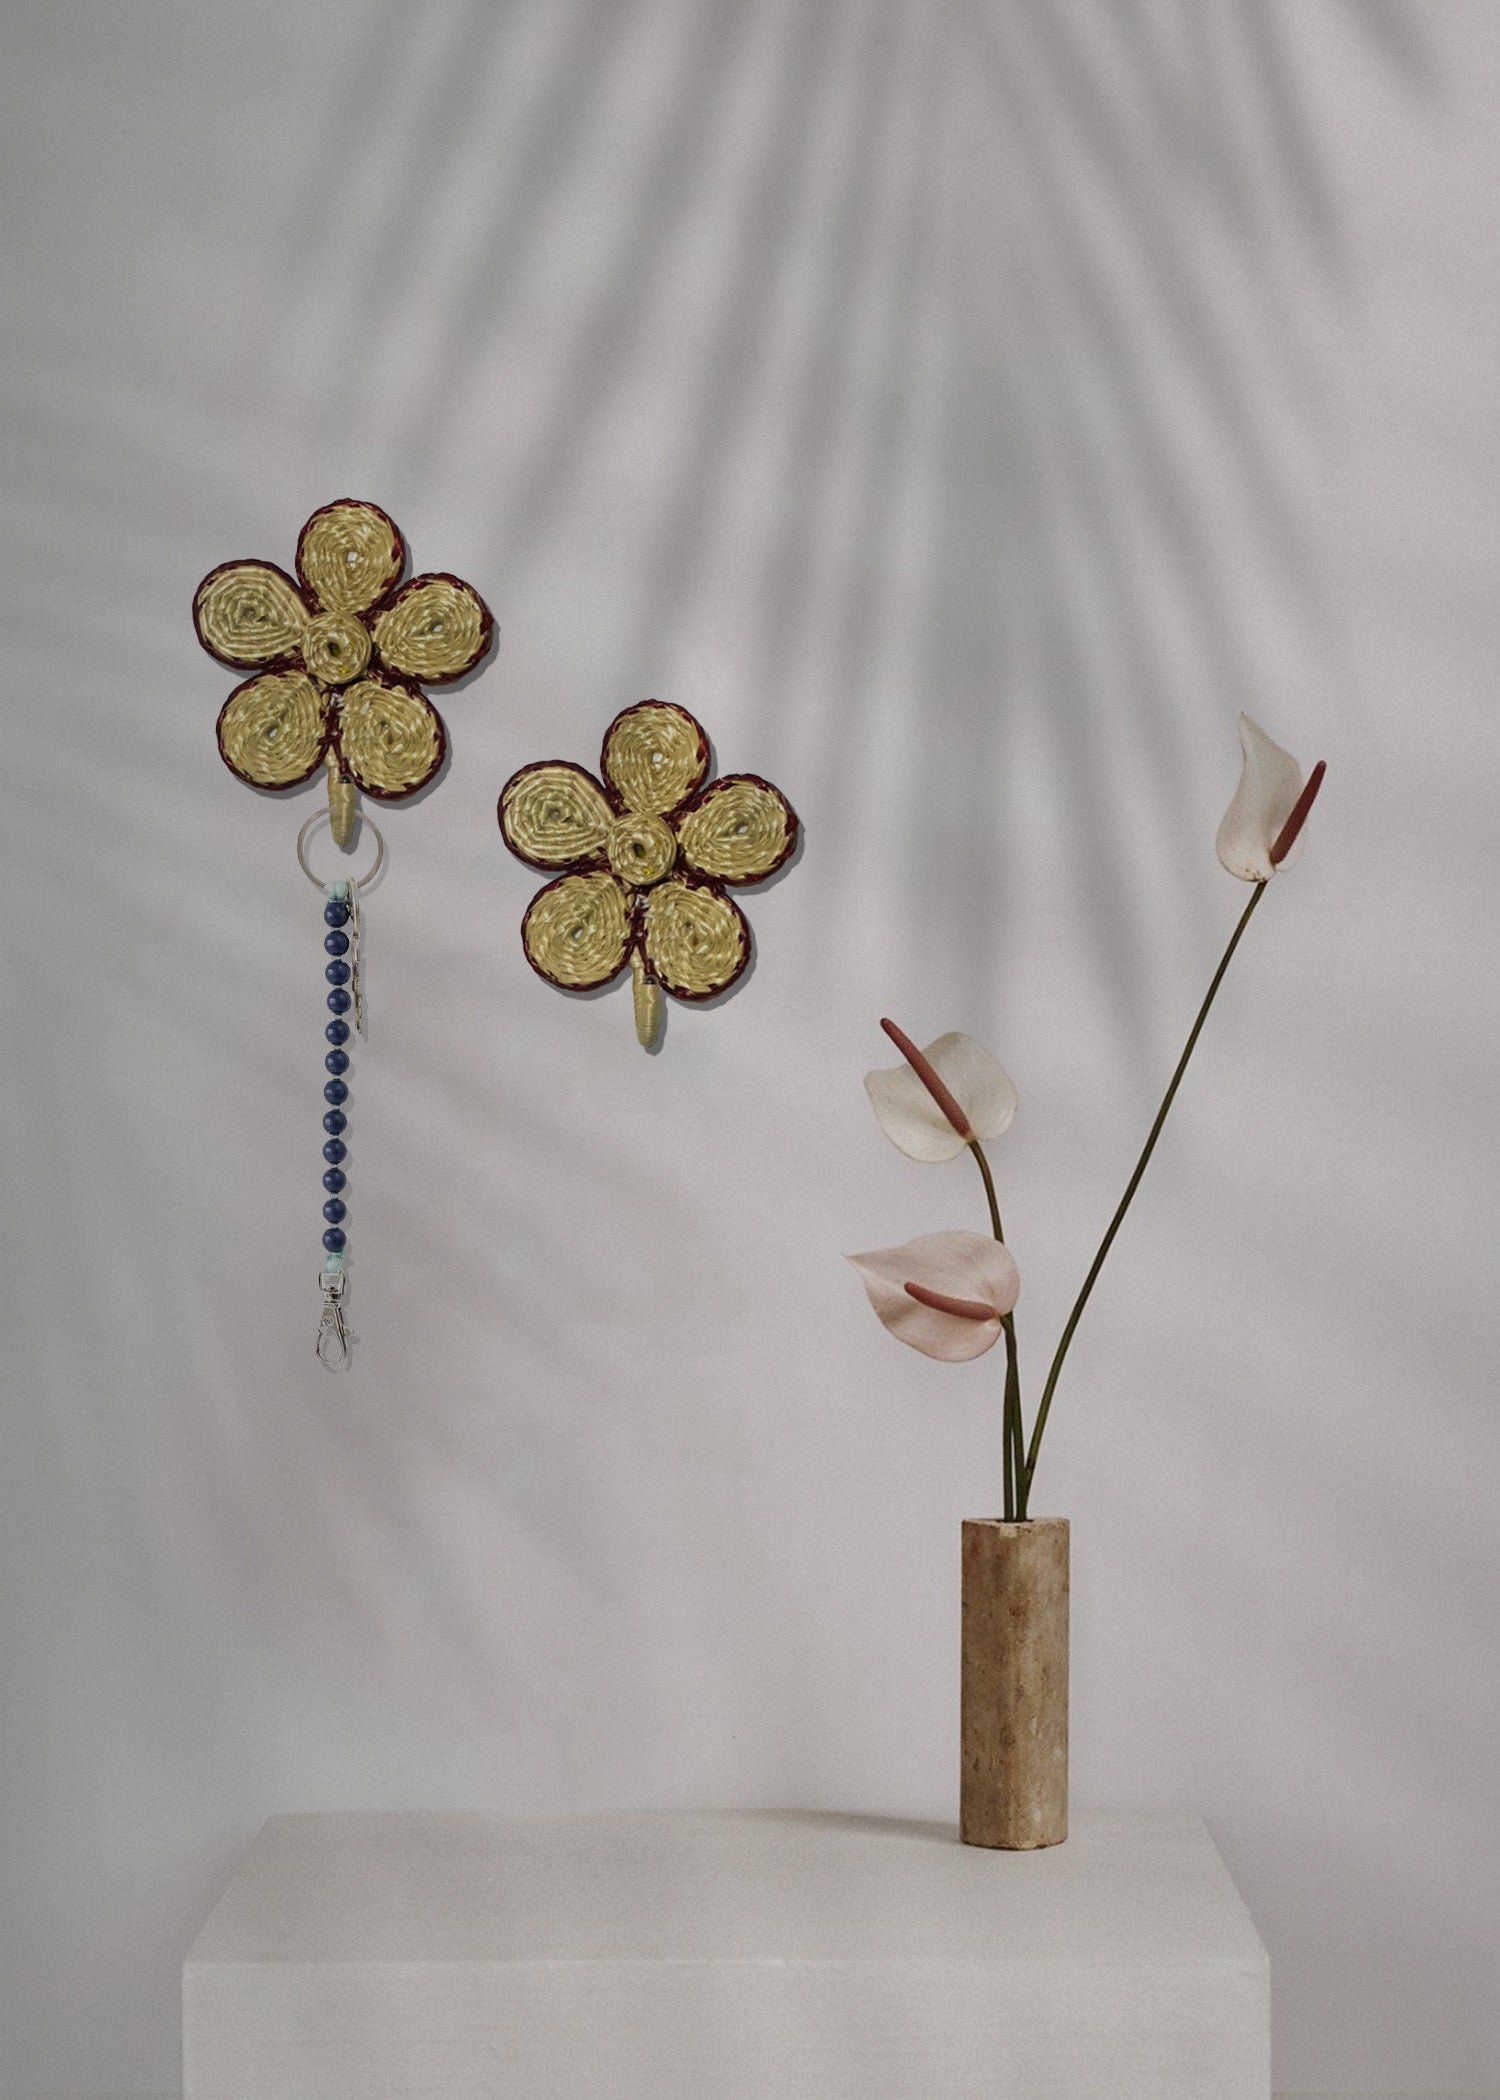 Sikki flower shaped hook is hung on the wall